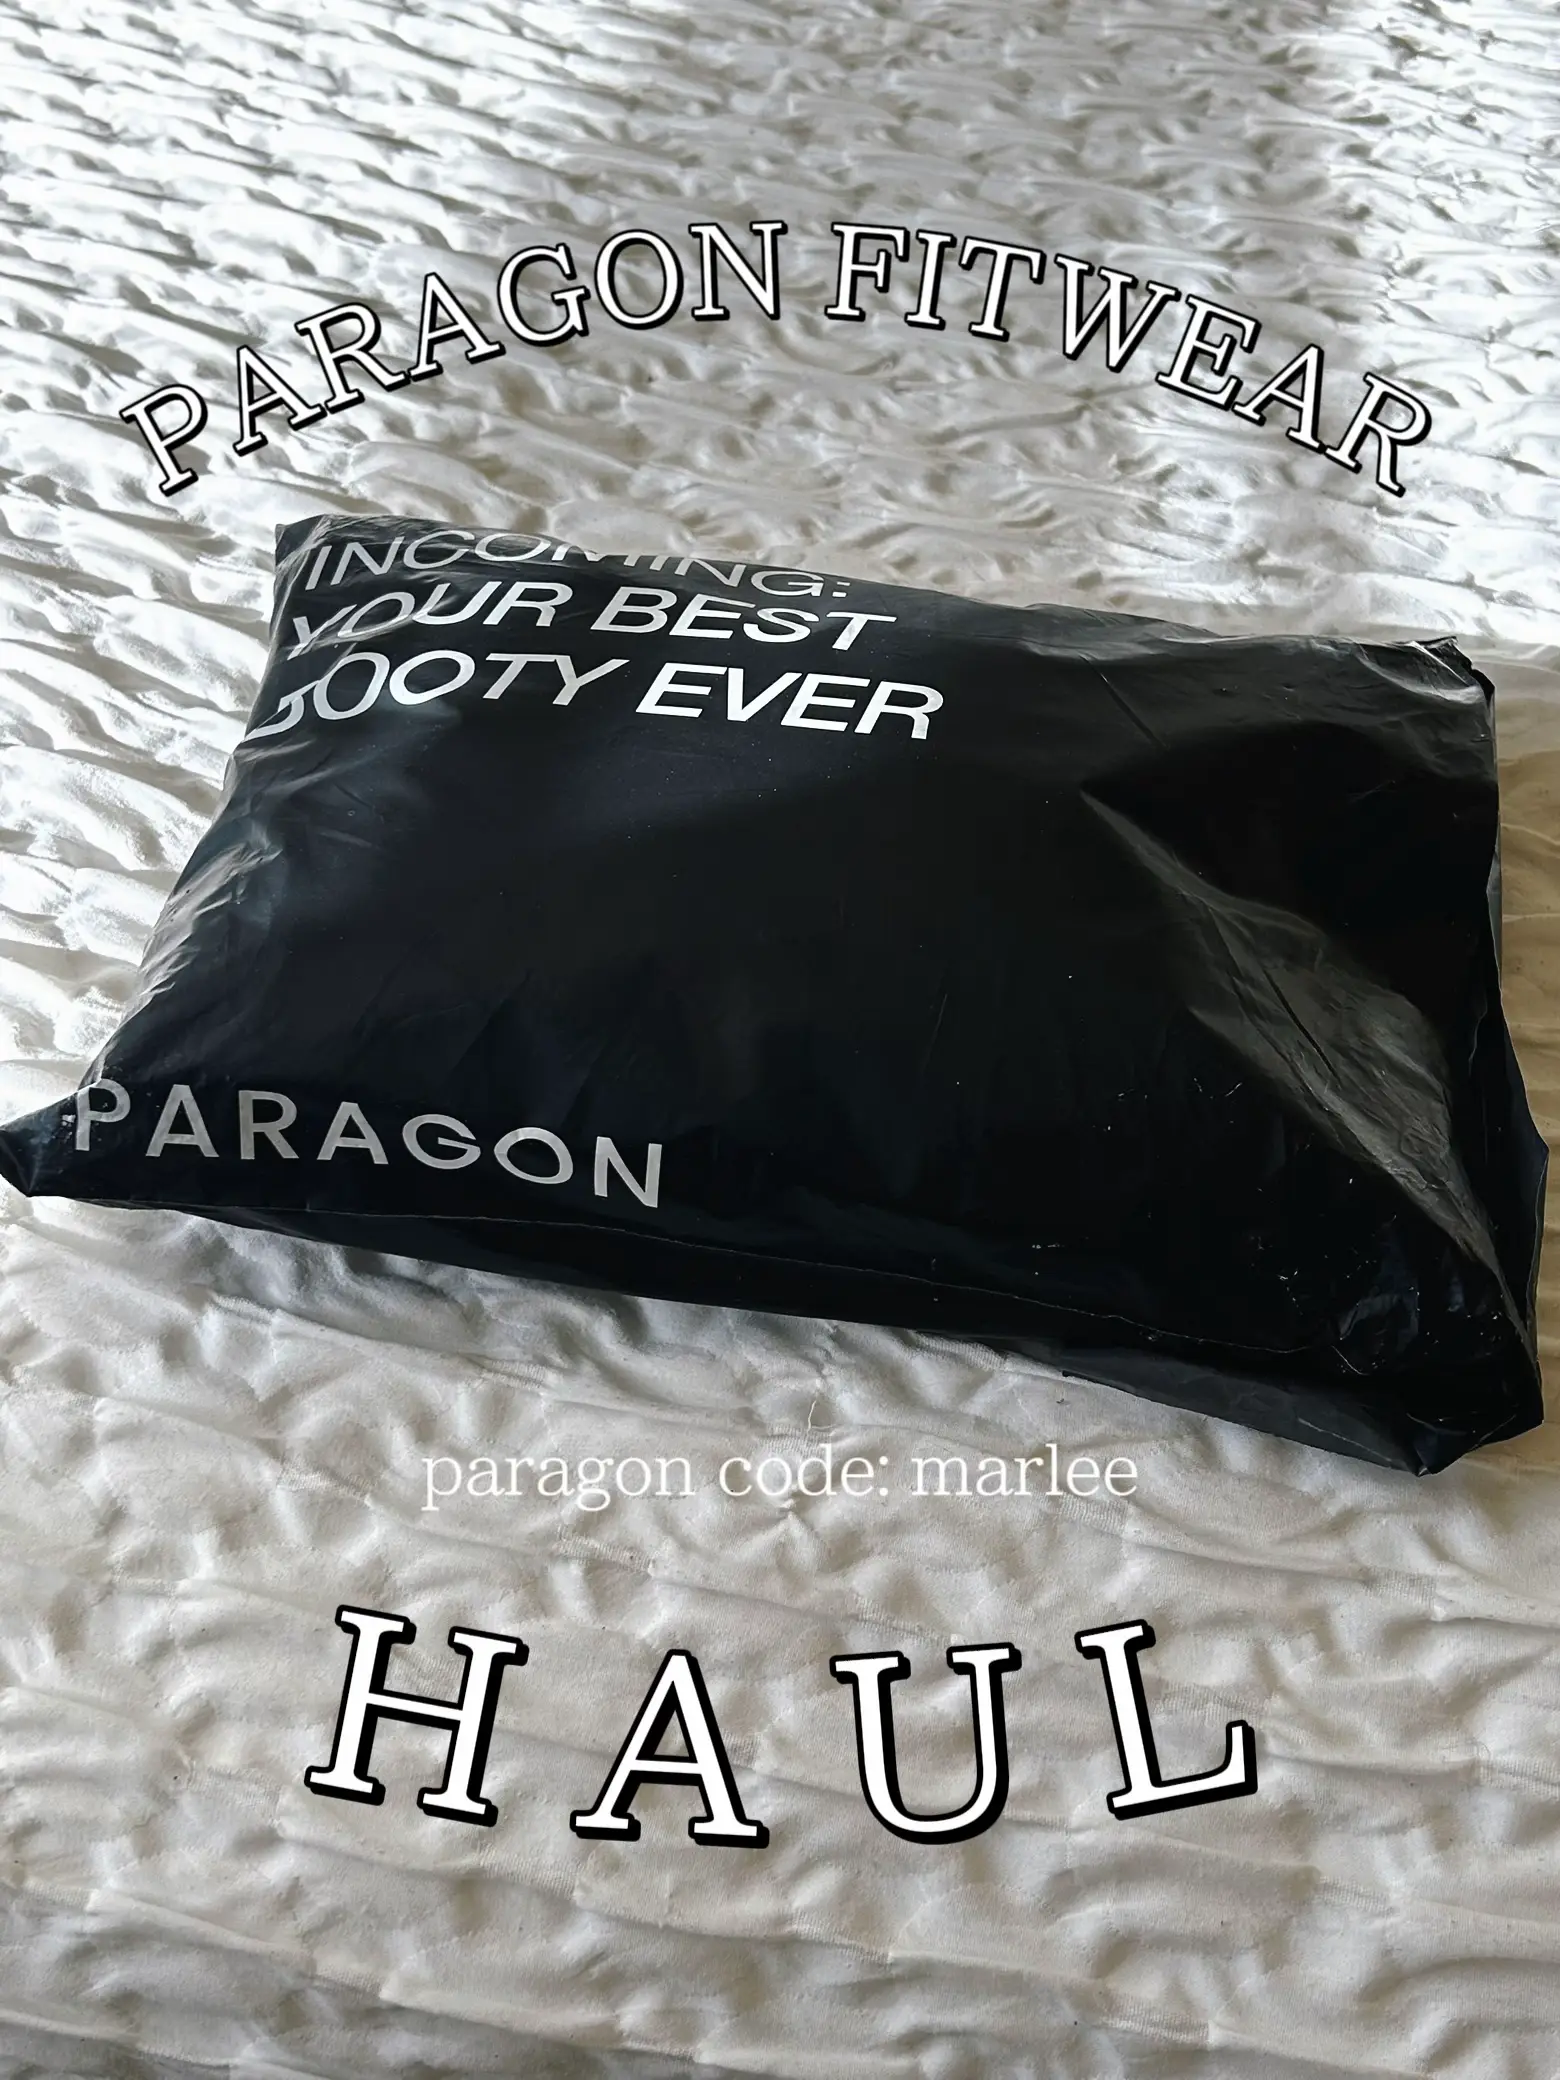 Paragon Fitwear Tank Review – Becoming Beautiful Today